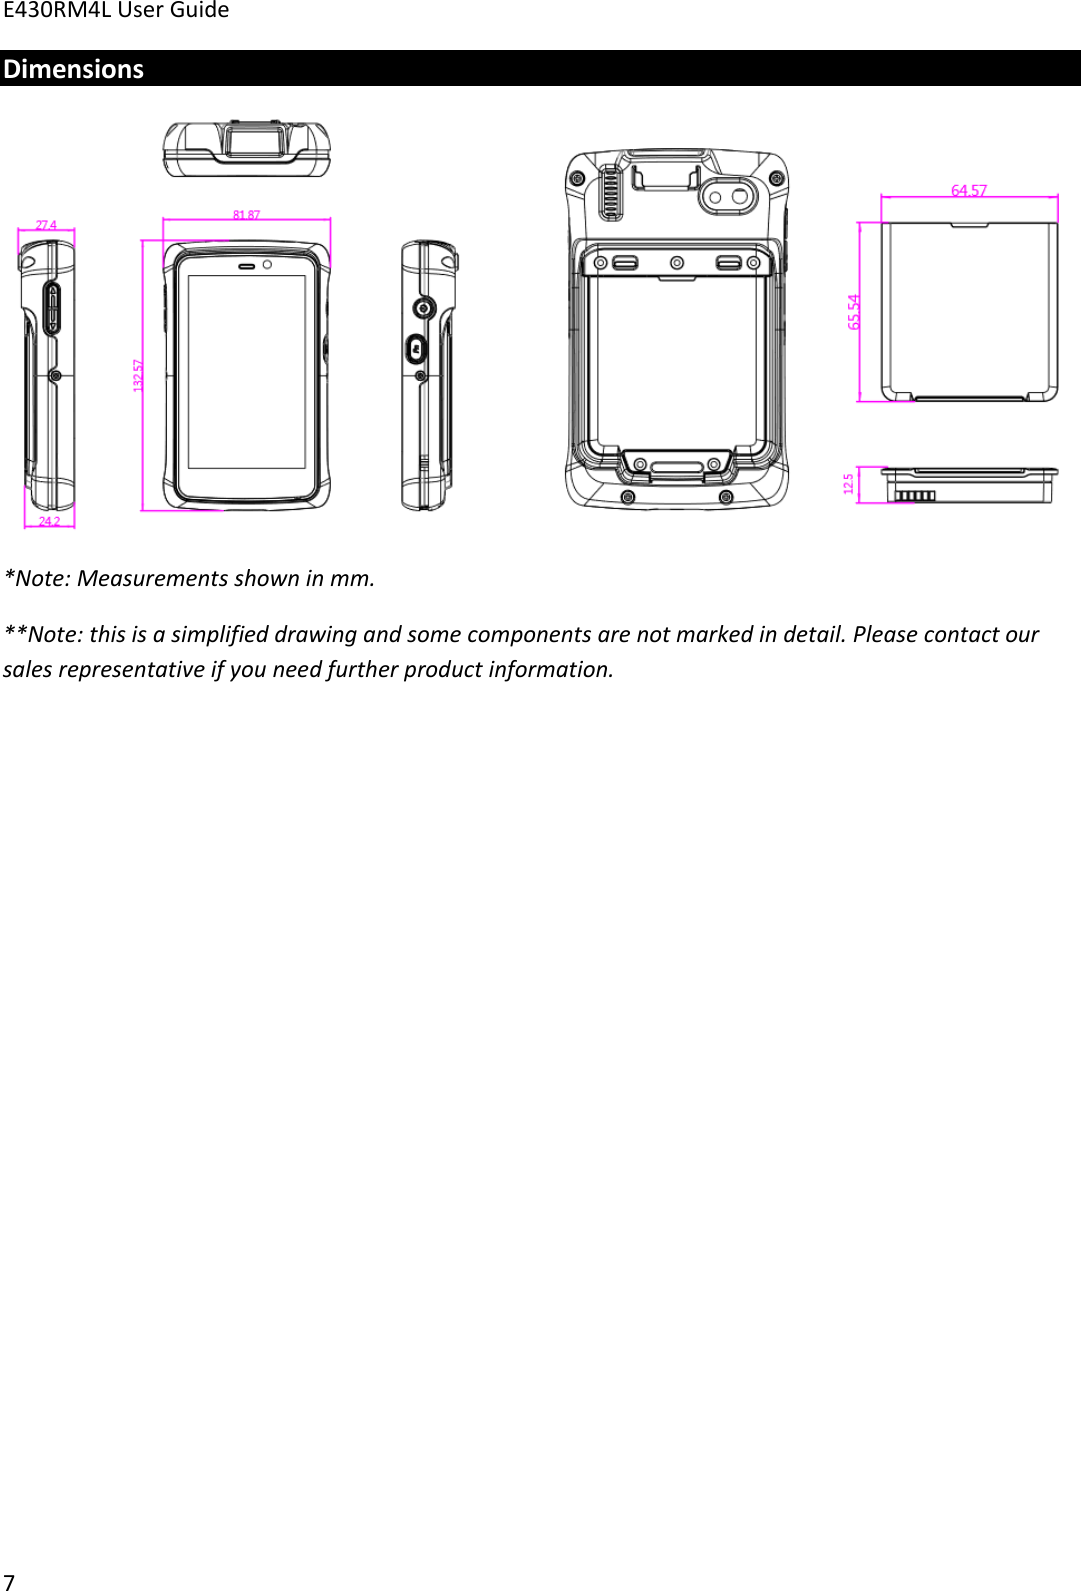 E430RM4L User Guide      7 Dimensions  *Note: Measurements shown in mm. **Note: this is a simplified drawing and some components are not marked in detail. Please contact our sales representative if you need further product information.     